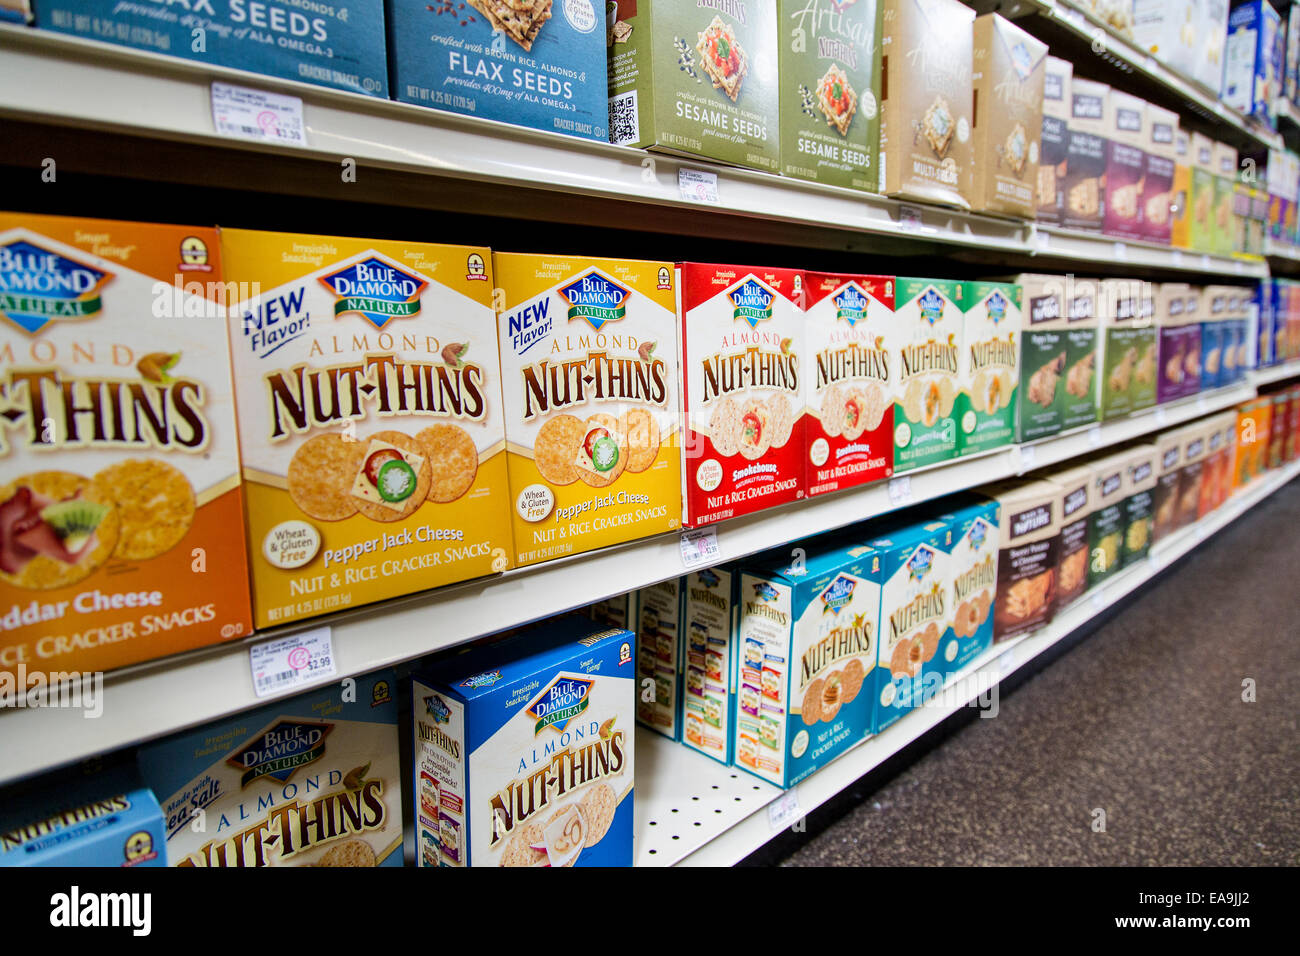 Boxes of Blue Diamond Nut-Thins sit on the shelves of a natural foods store. Stock Photo